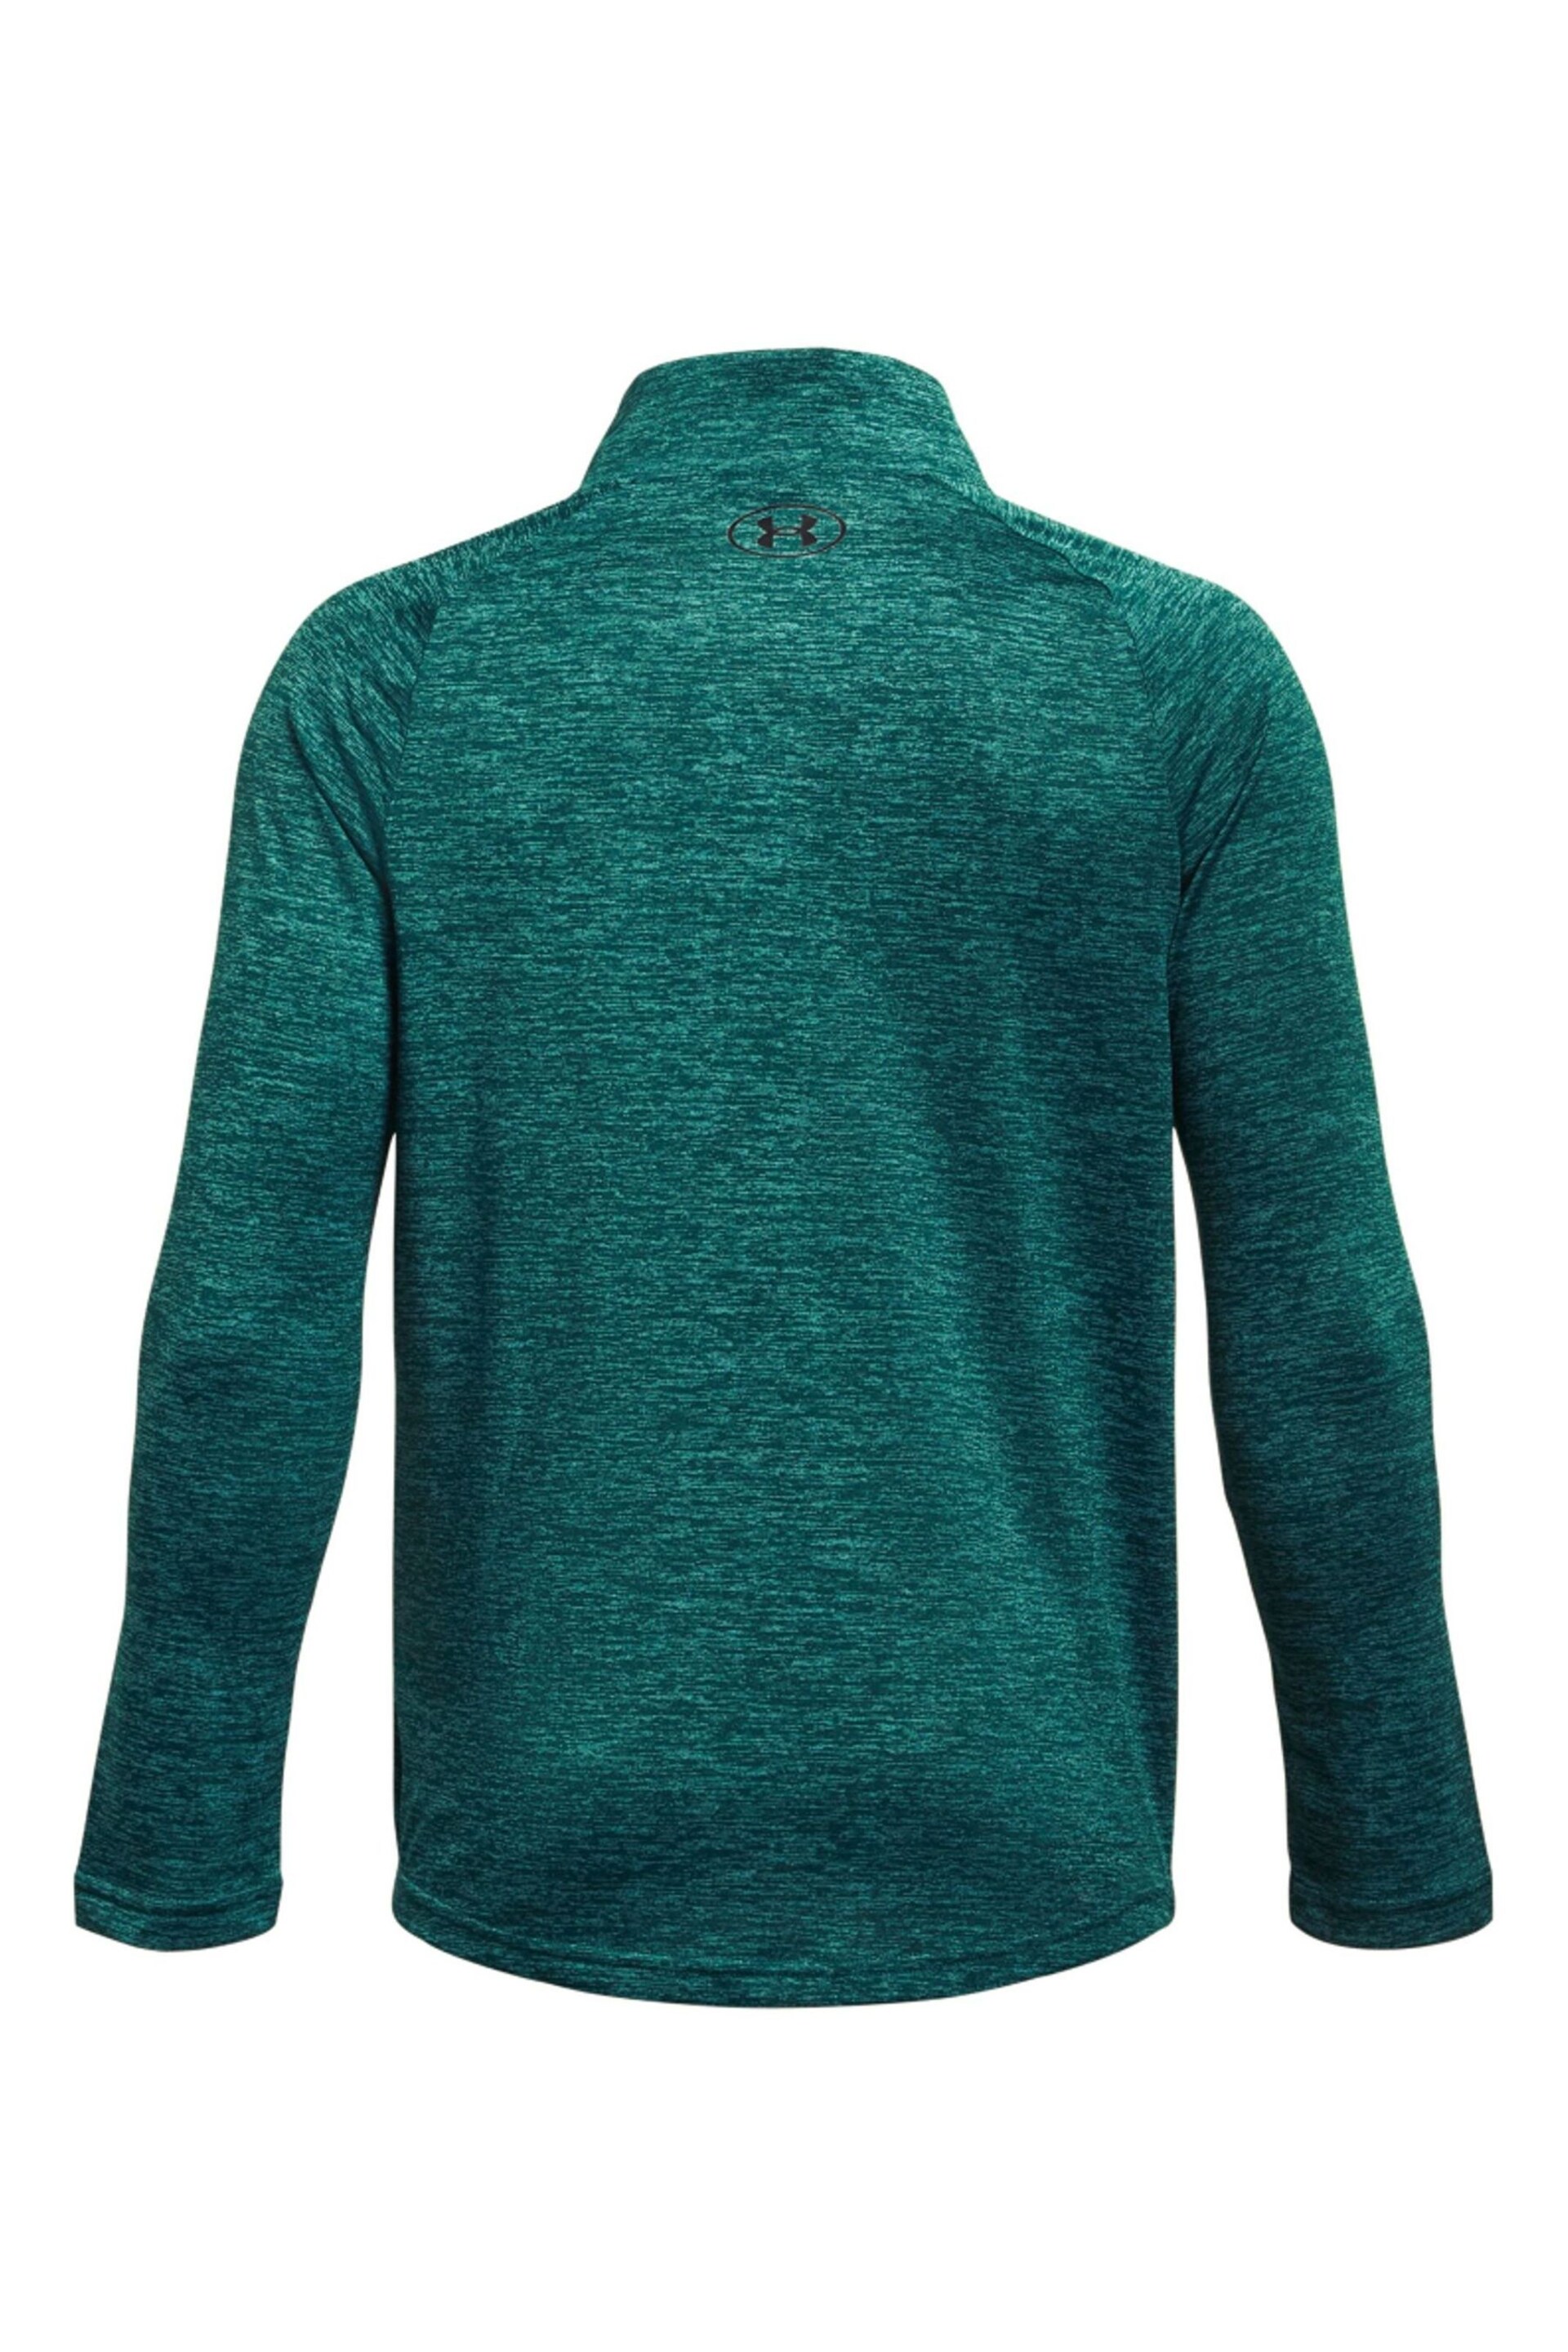 Under Armour Blue Tech 2.0 1/2 Zip Sweater - Image 2 of 2